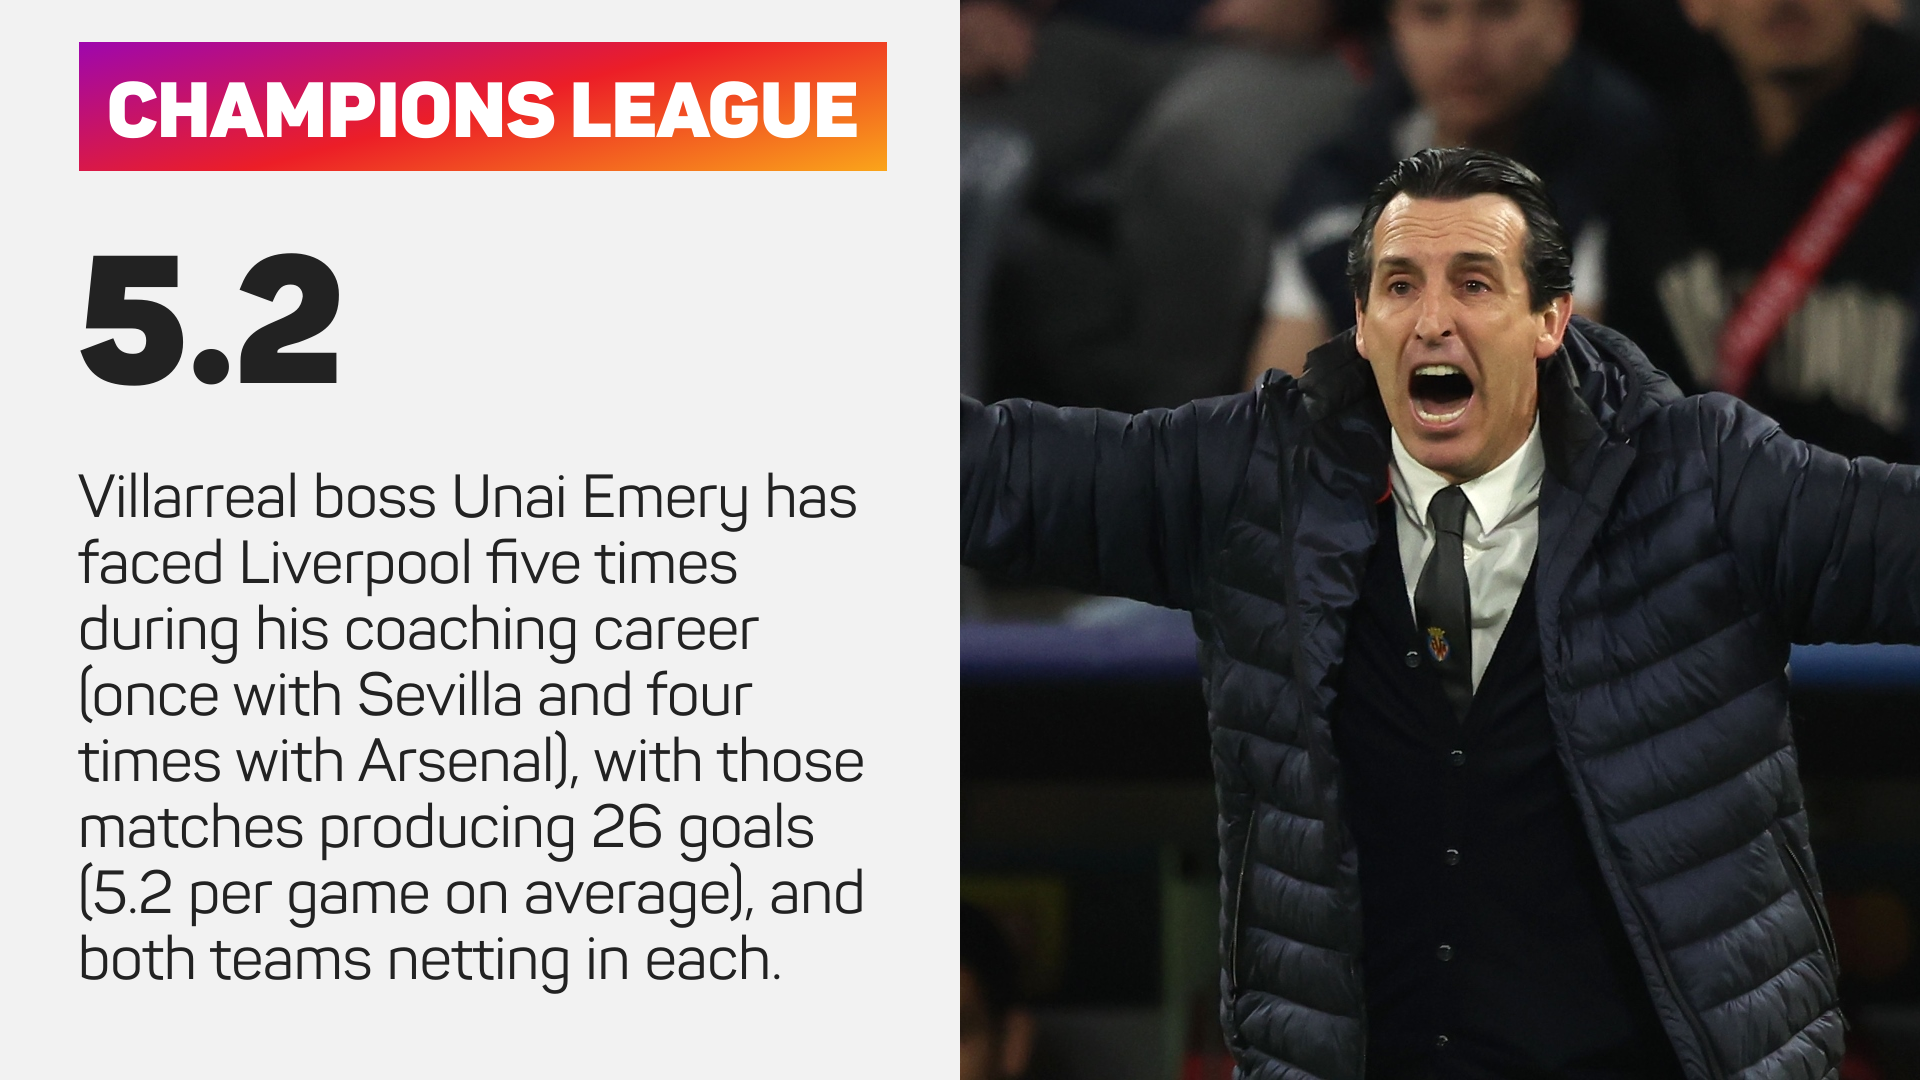 Goals can be expected when Unai Emery sides face Liverpool